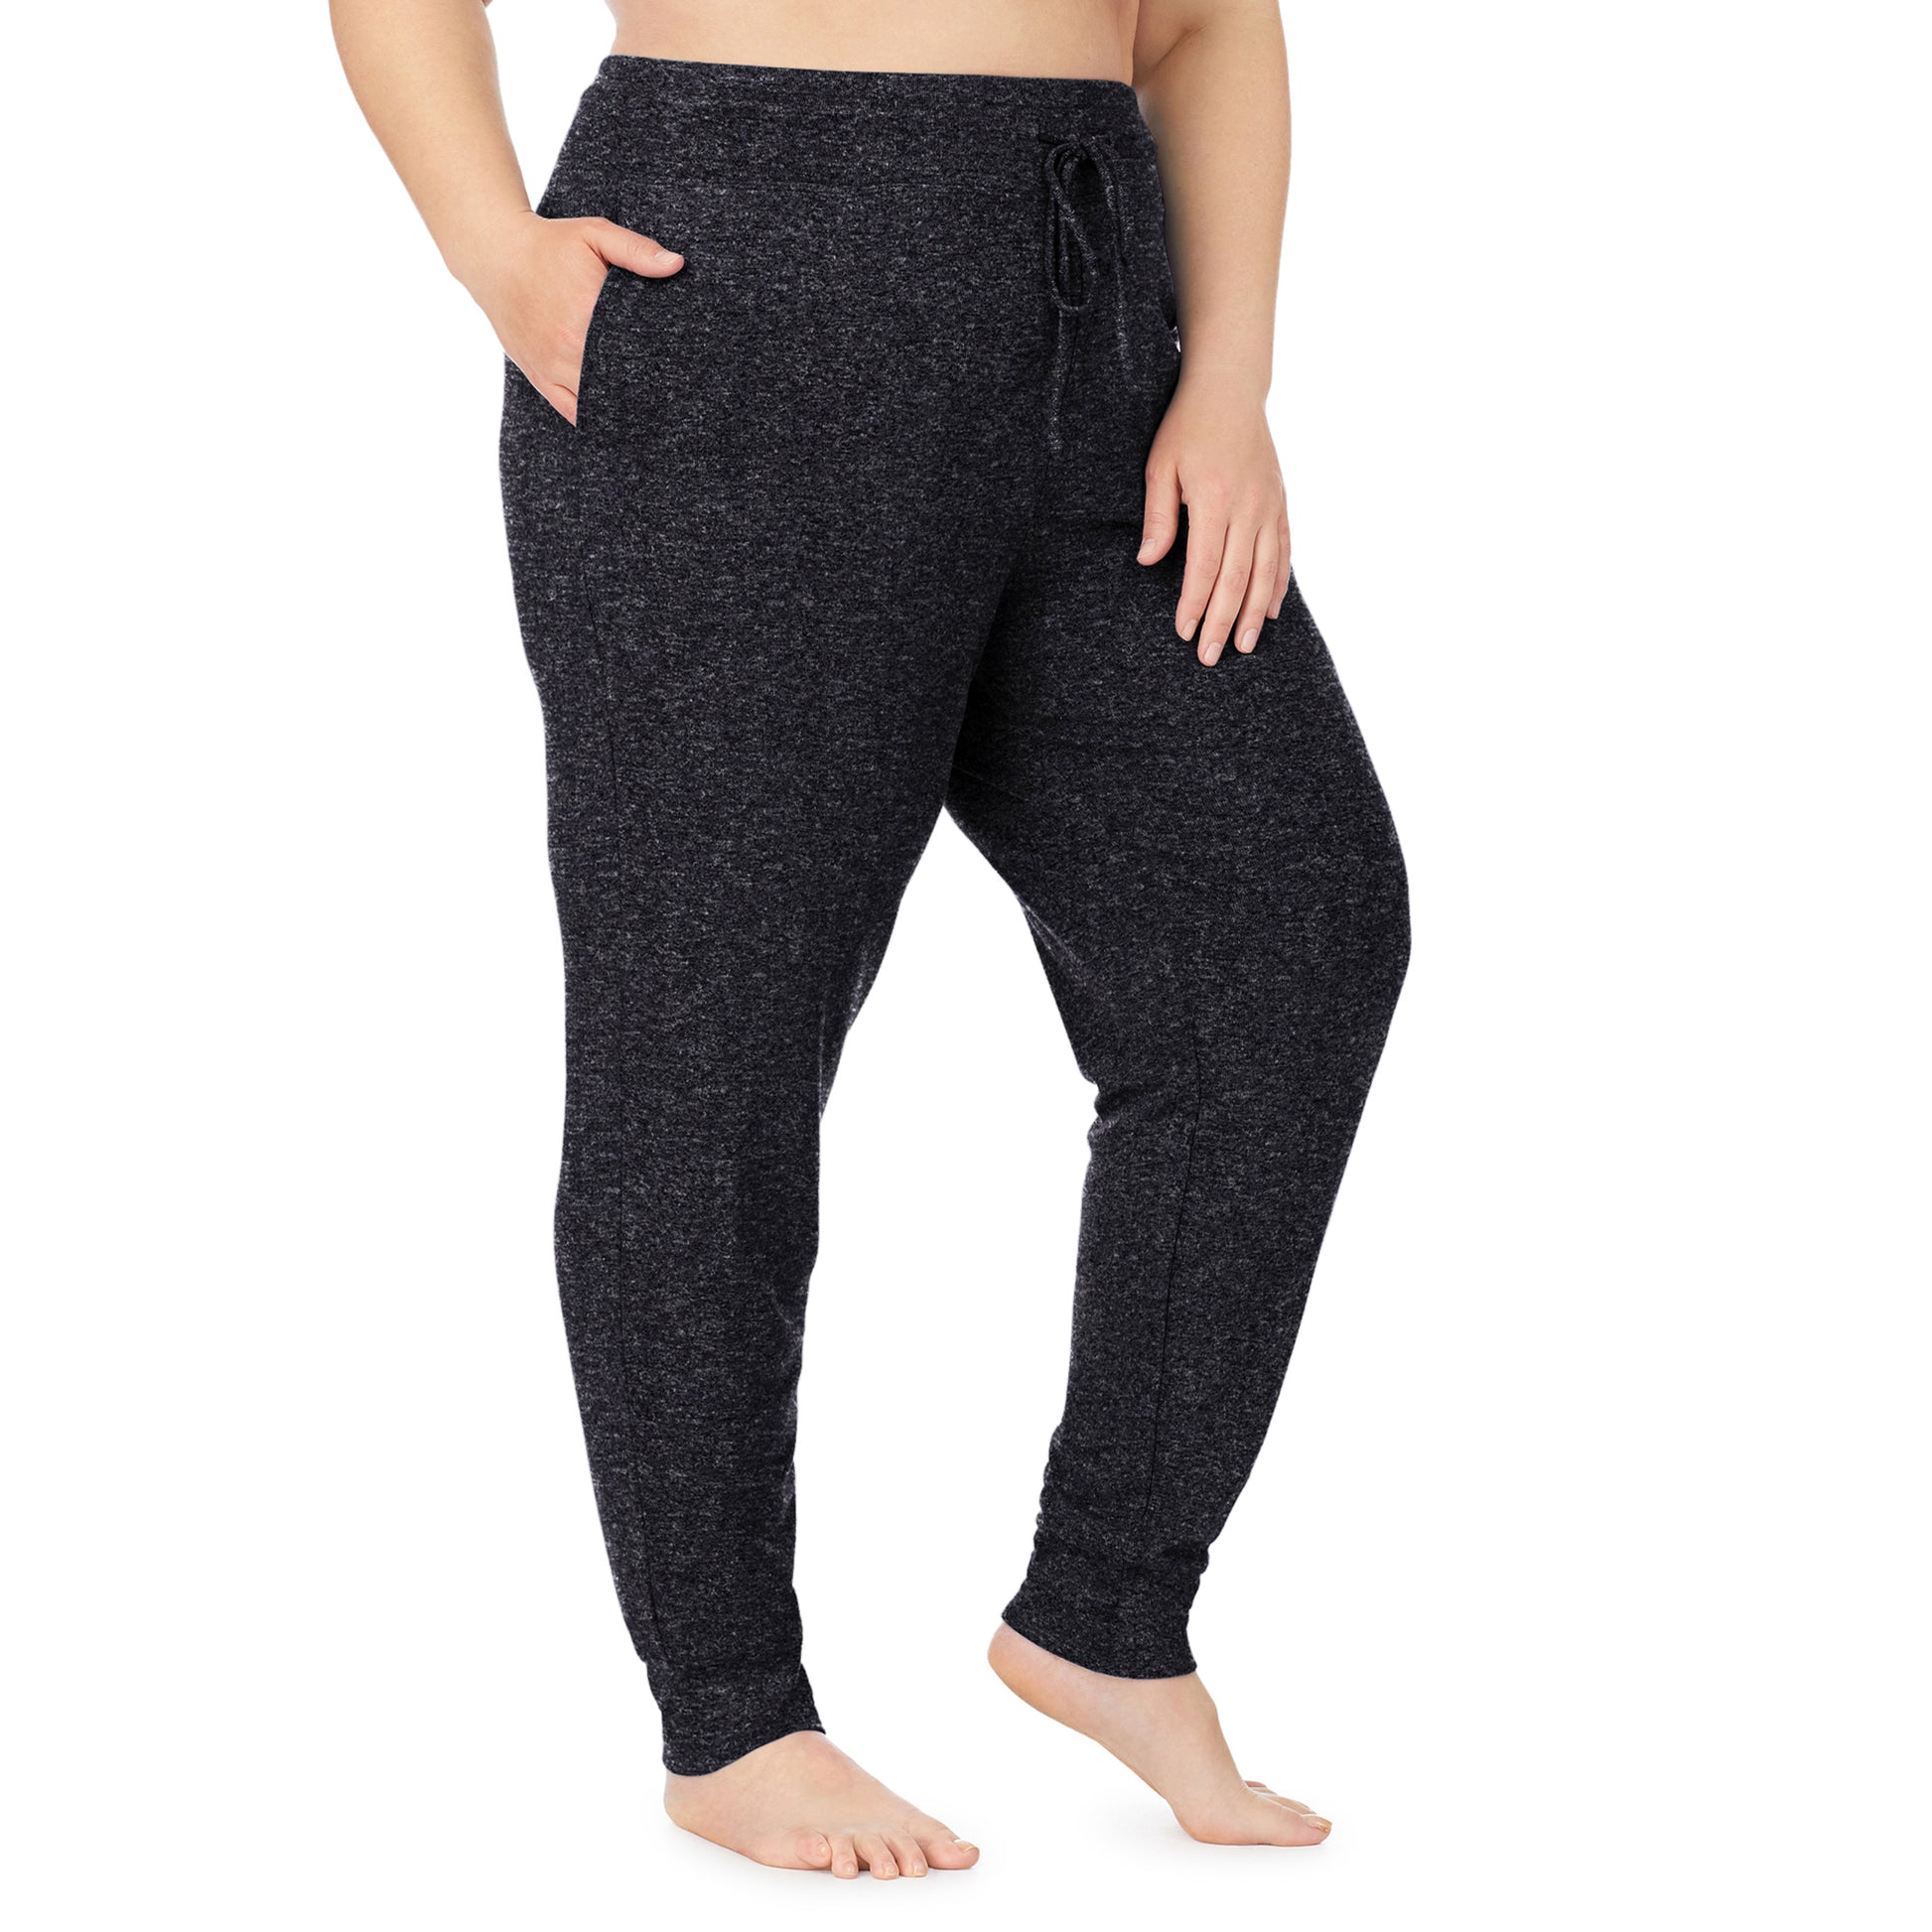 Marled Dark Charcoal; Model is wearing size 1X. She is 5'9", Bust 38", Waist 36", Hips 48.5". @A lady wearing a marled dark charcoal jogger plus.